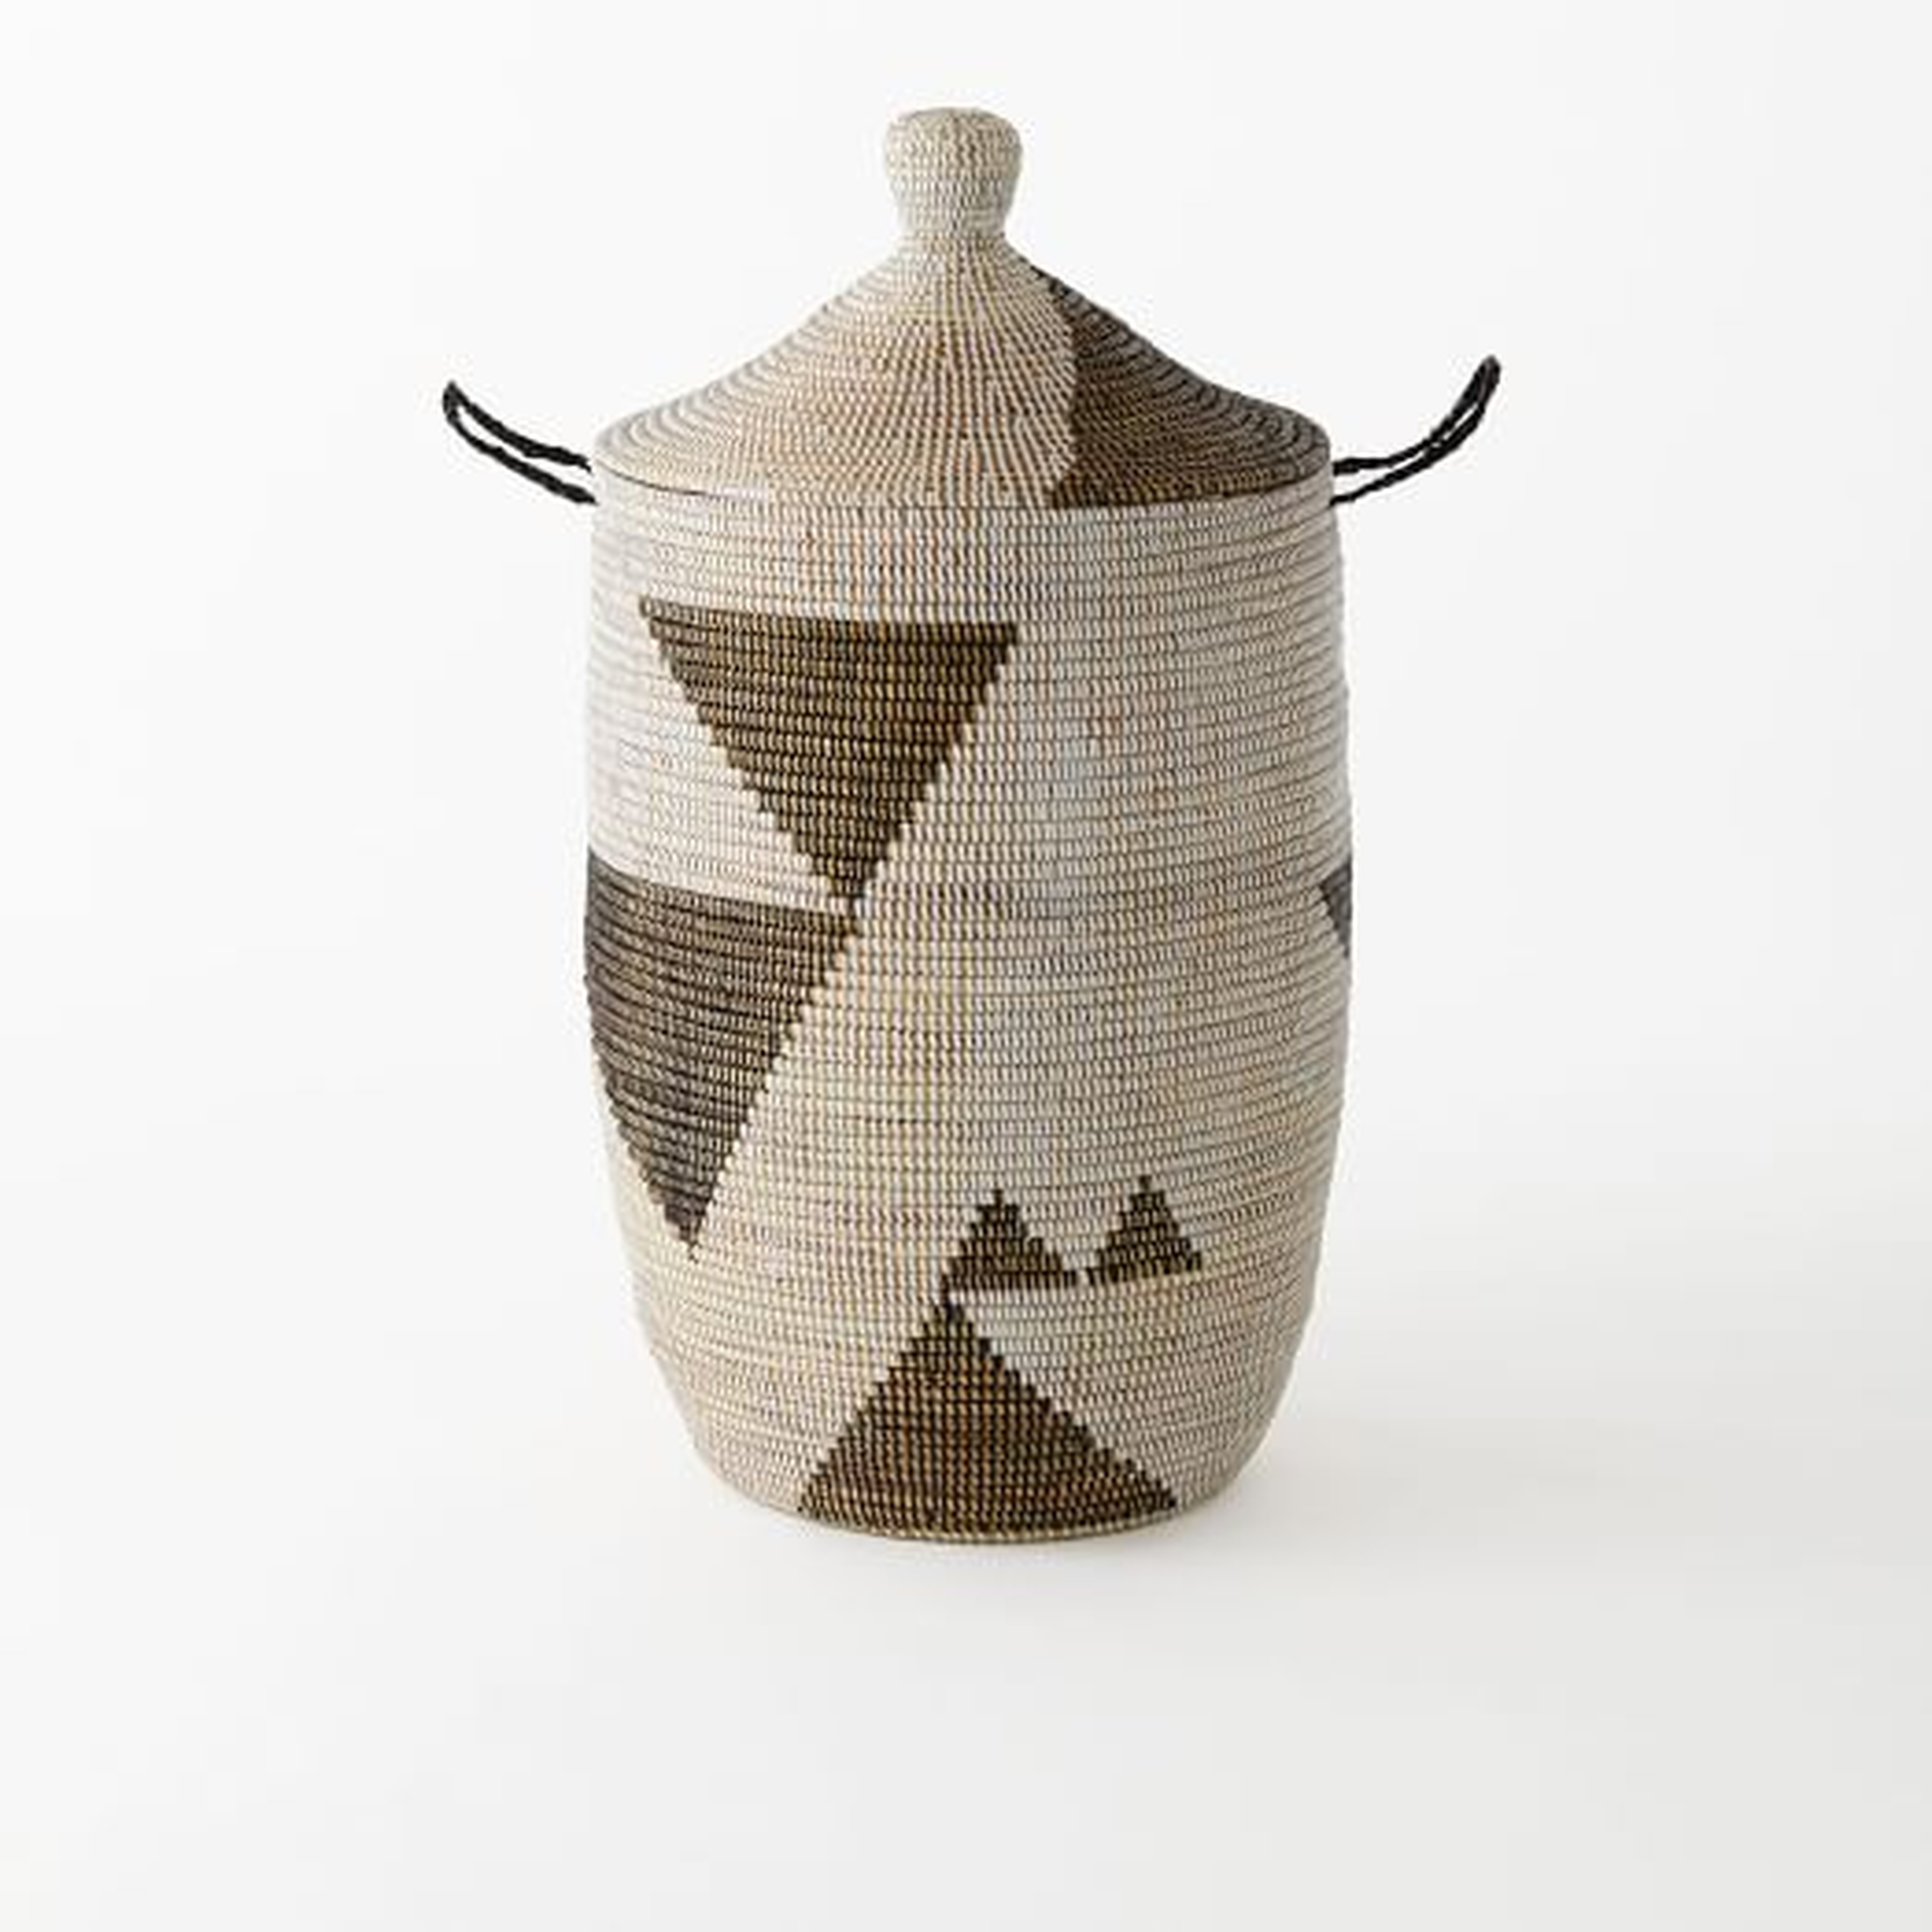 Graphic Woven Baskets - Black/White - Large - West Elm